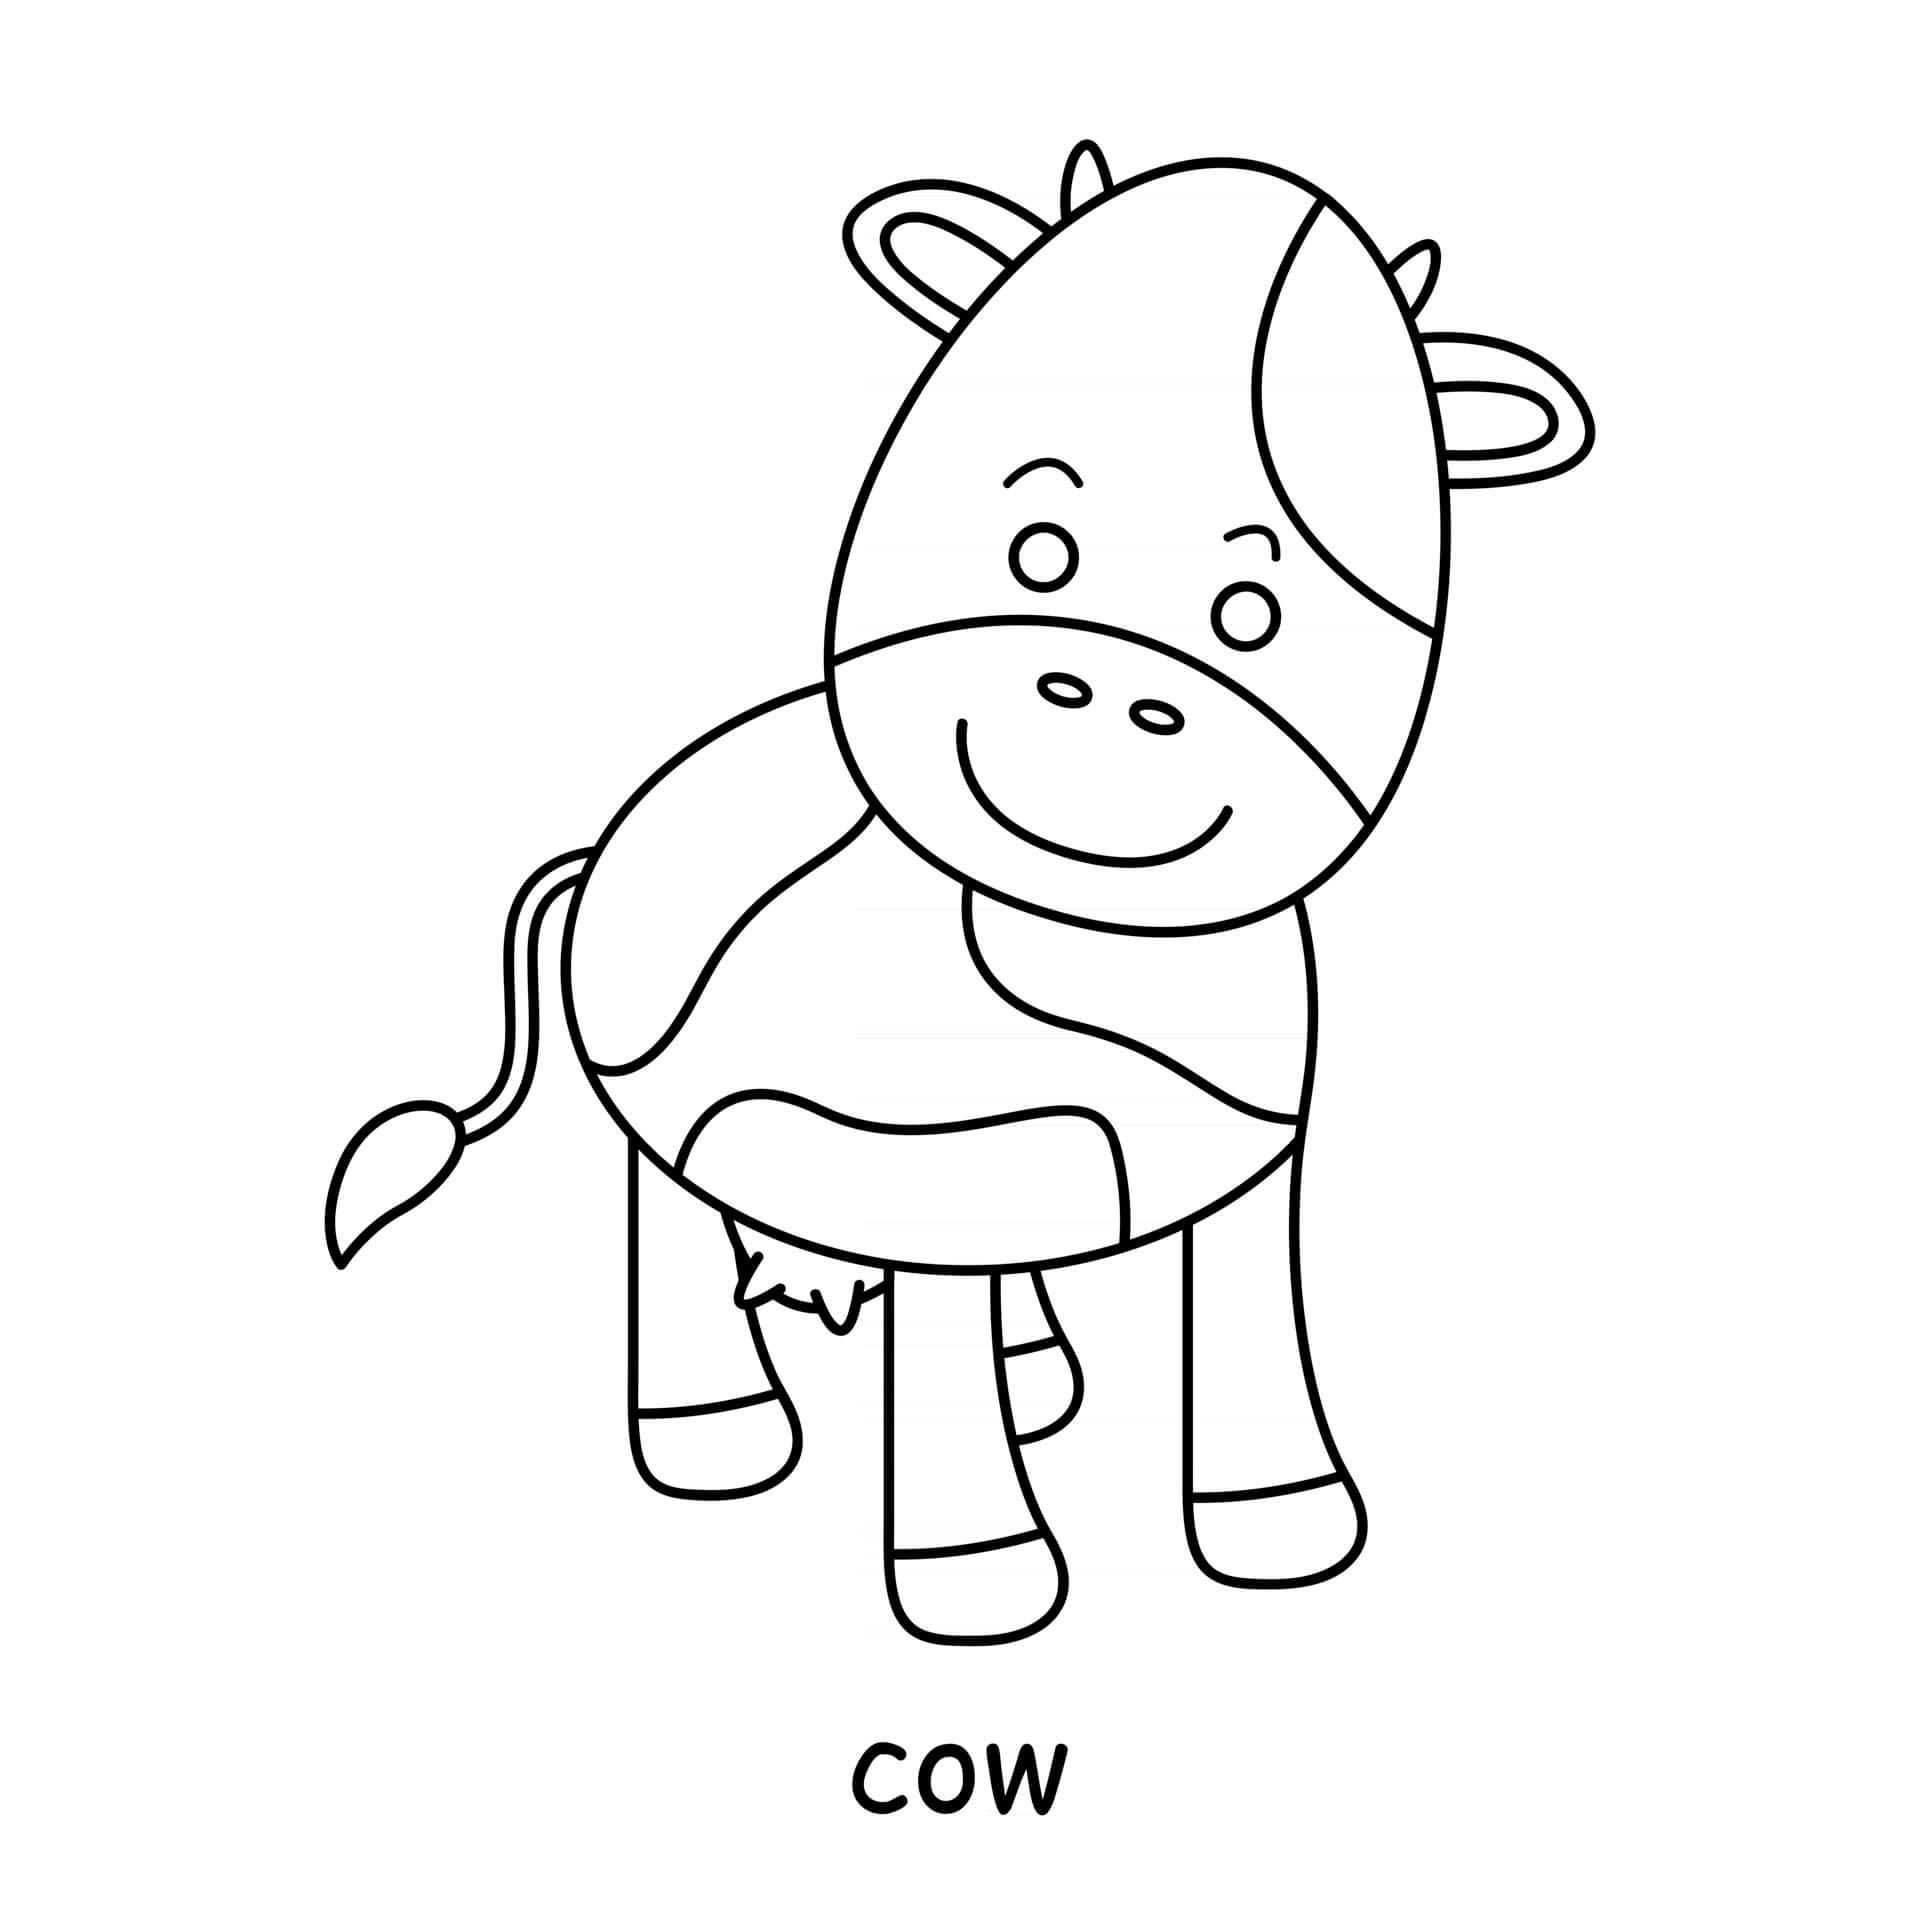 Cow Coloring Pages - Coloring Cool